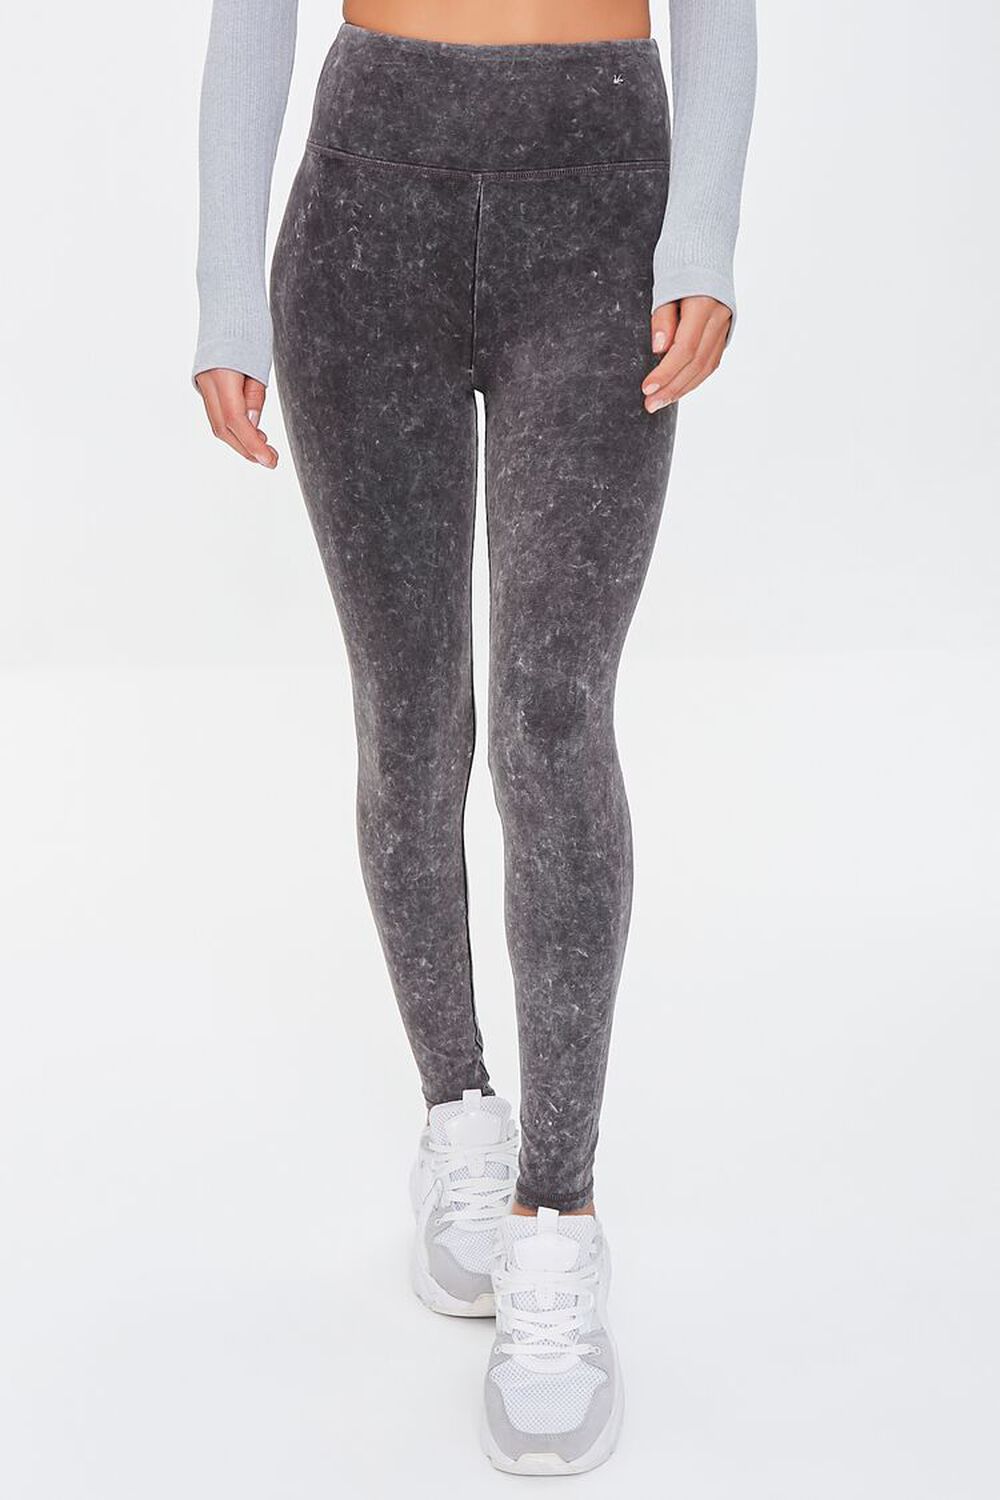 CHARCOAL Active Mineral Wash Leggings, image 2